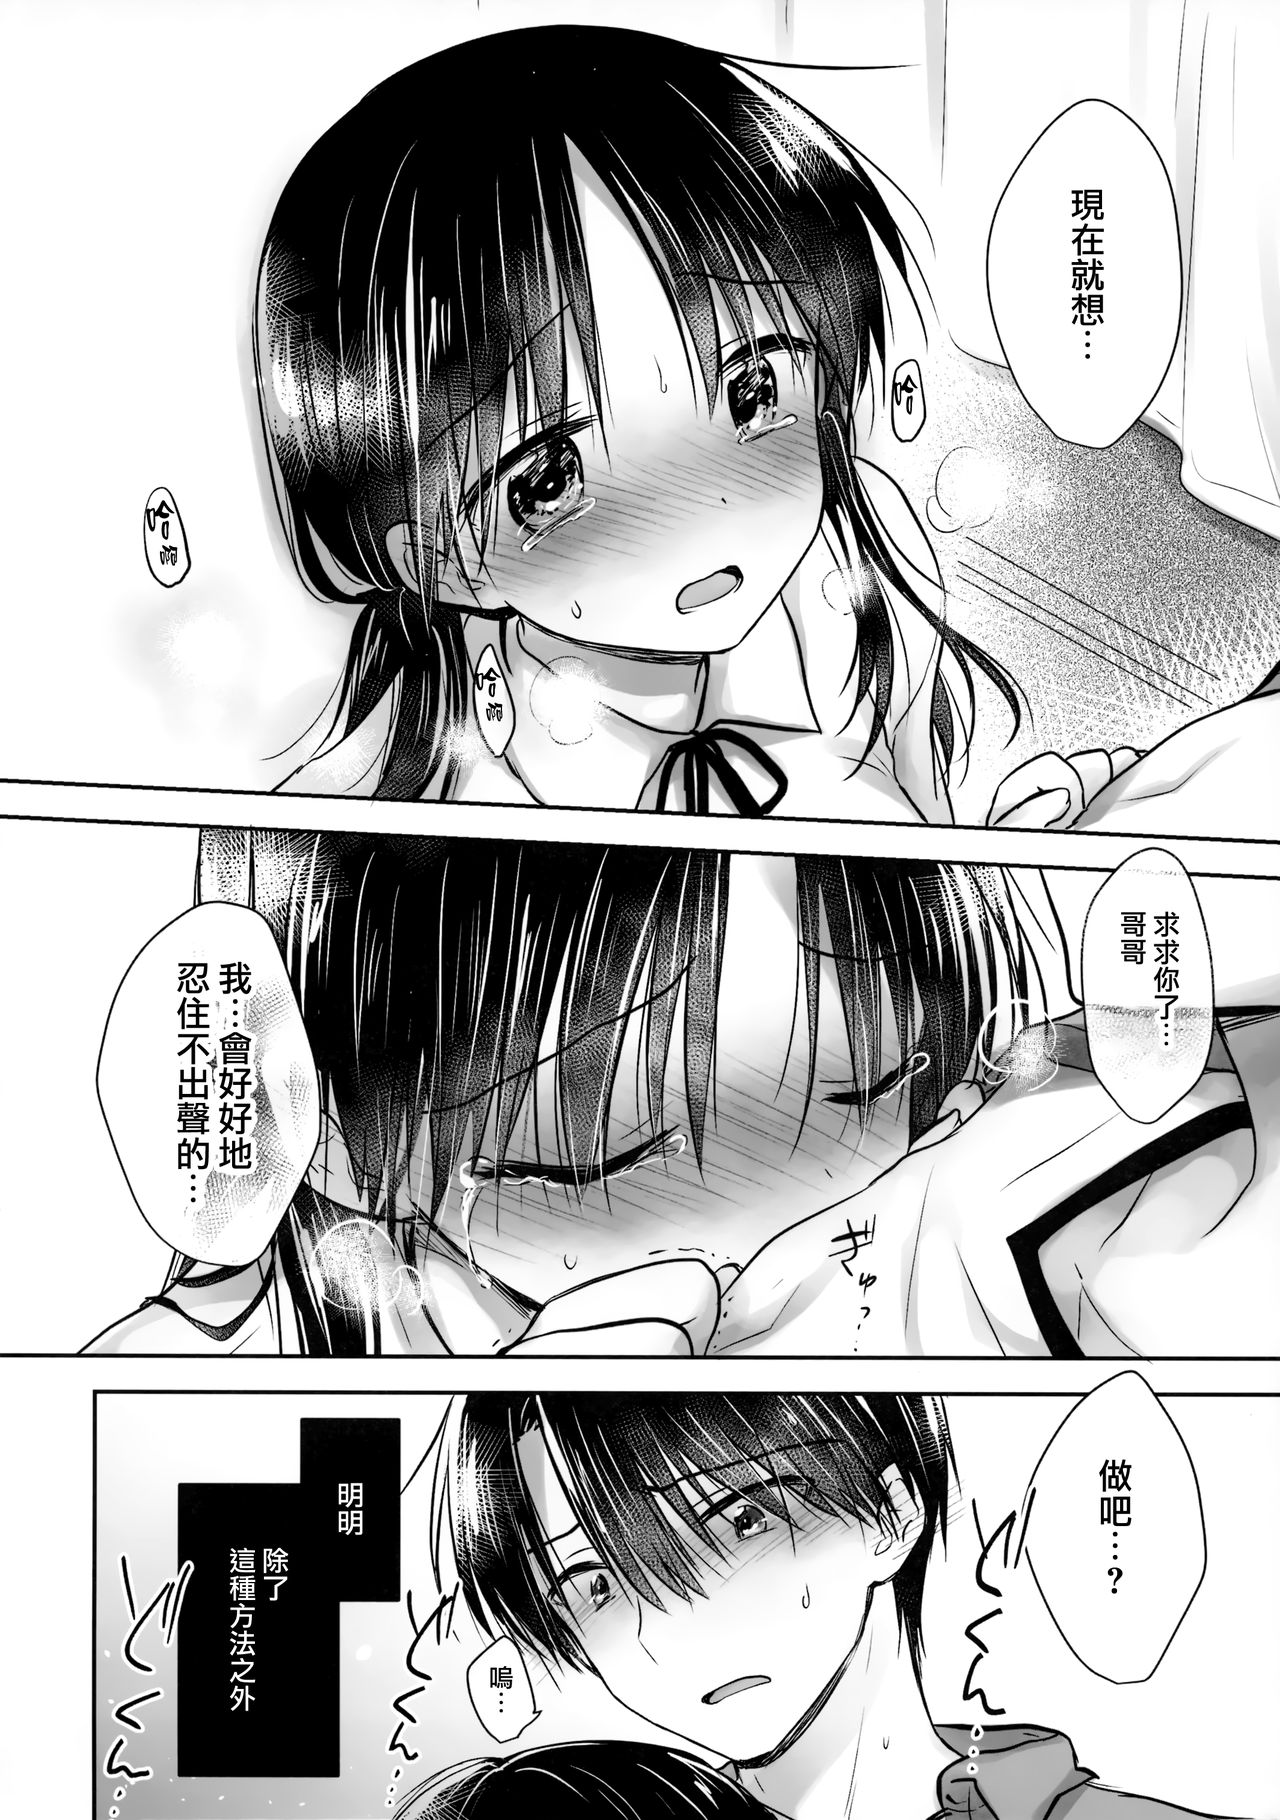 (C96) [Aquadrop (Mikami Mika)] Omoide Sex [Chinese] [山樱汉化] page 29 full